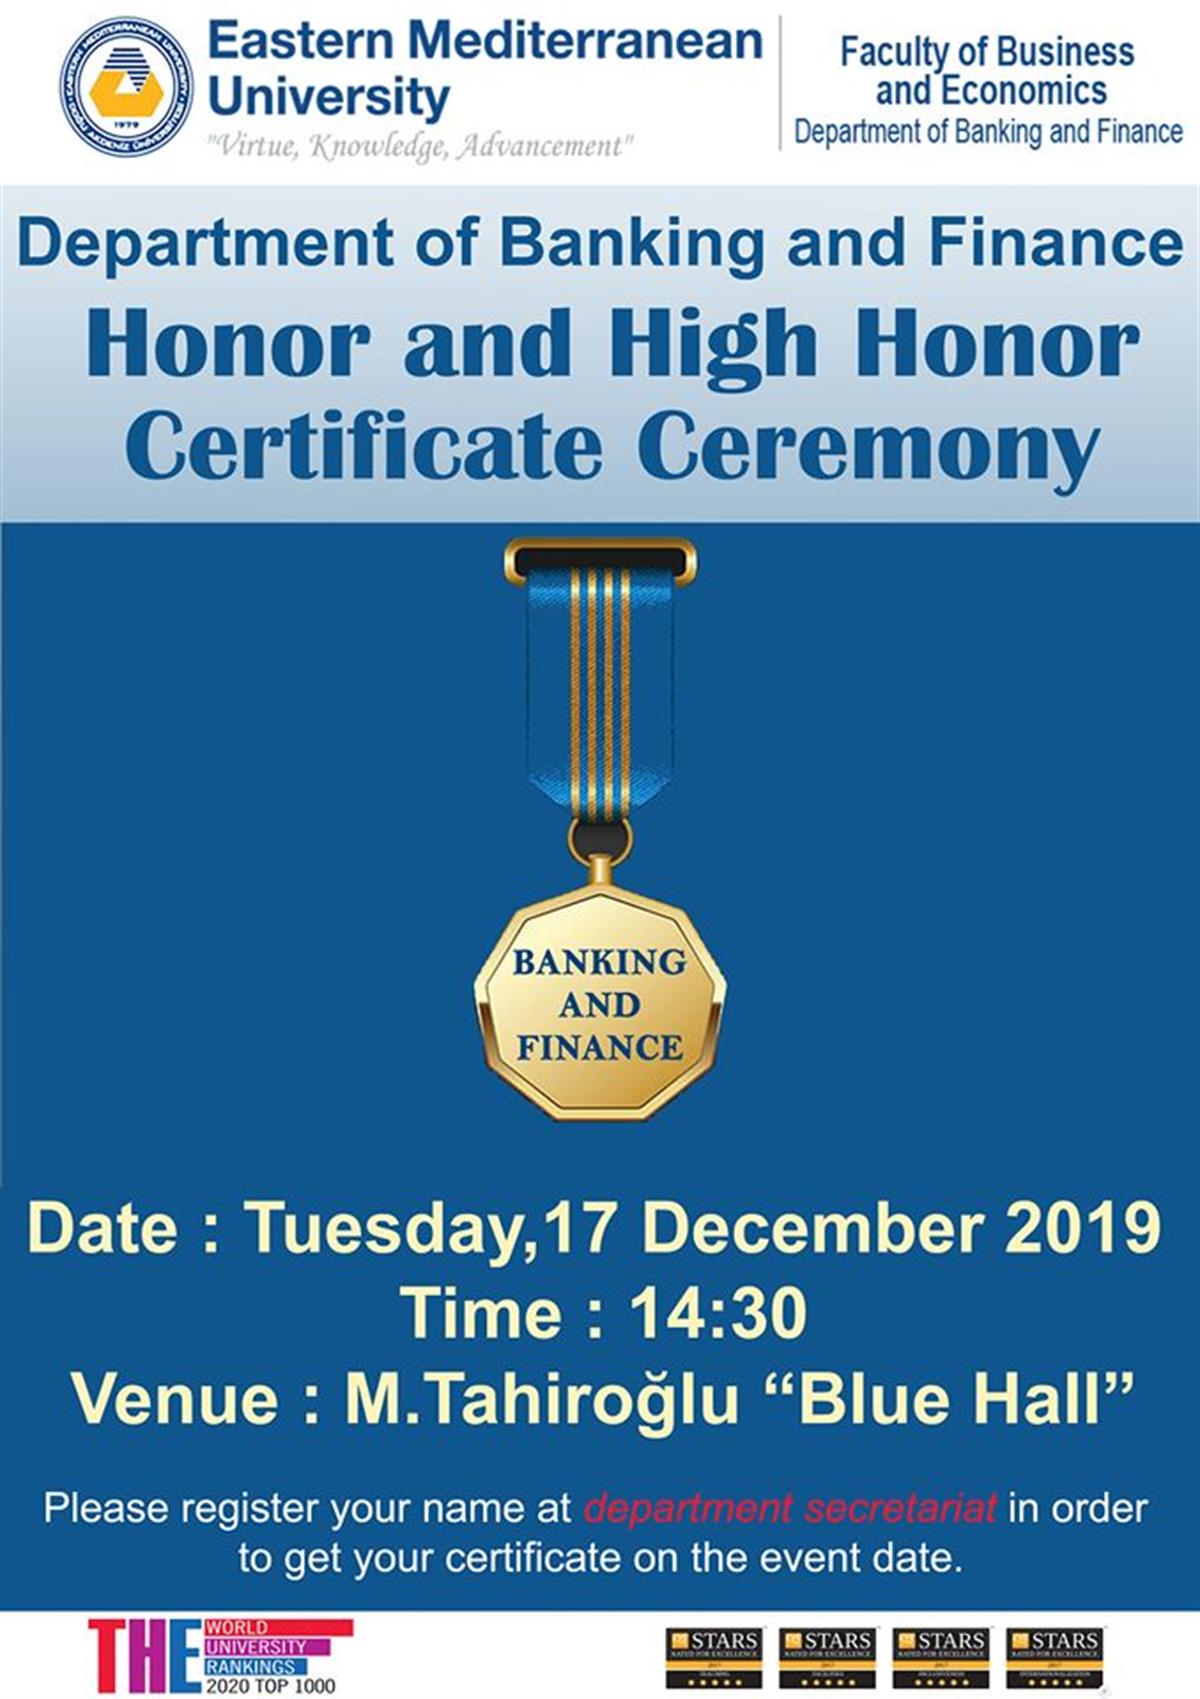  HONOR AND HIGH HONOR CERTIFICATE AWARD CEREMONY